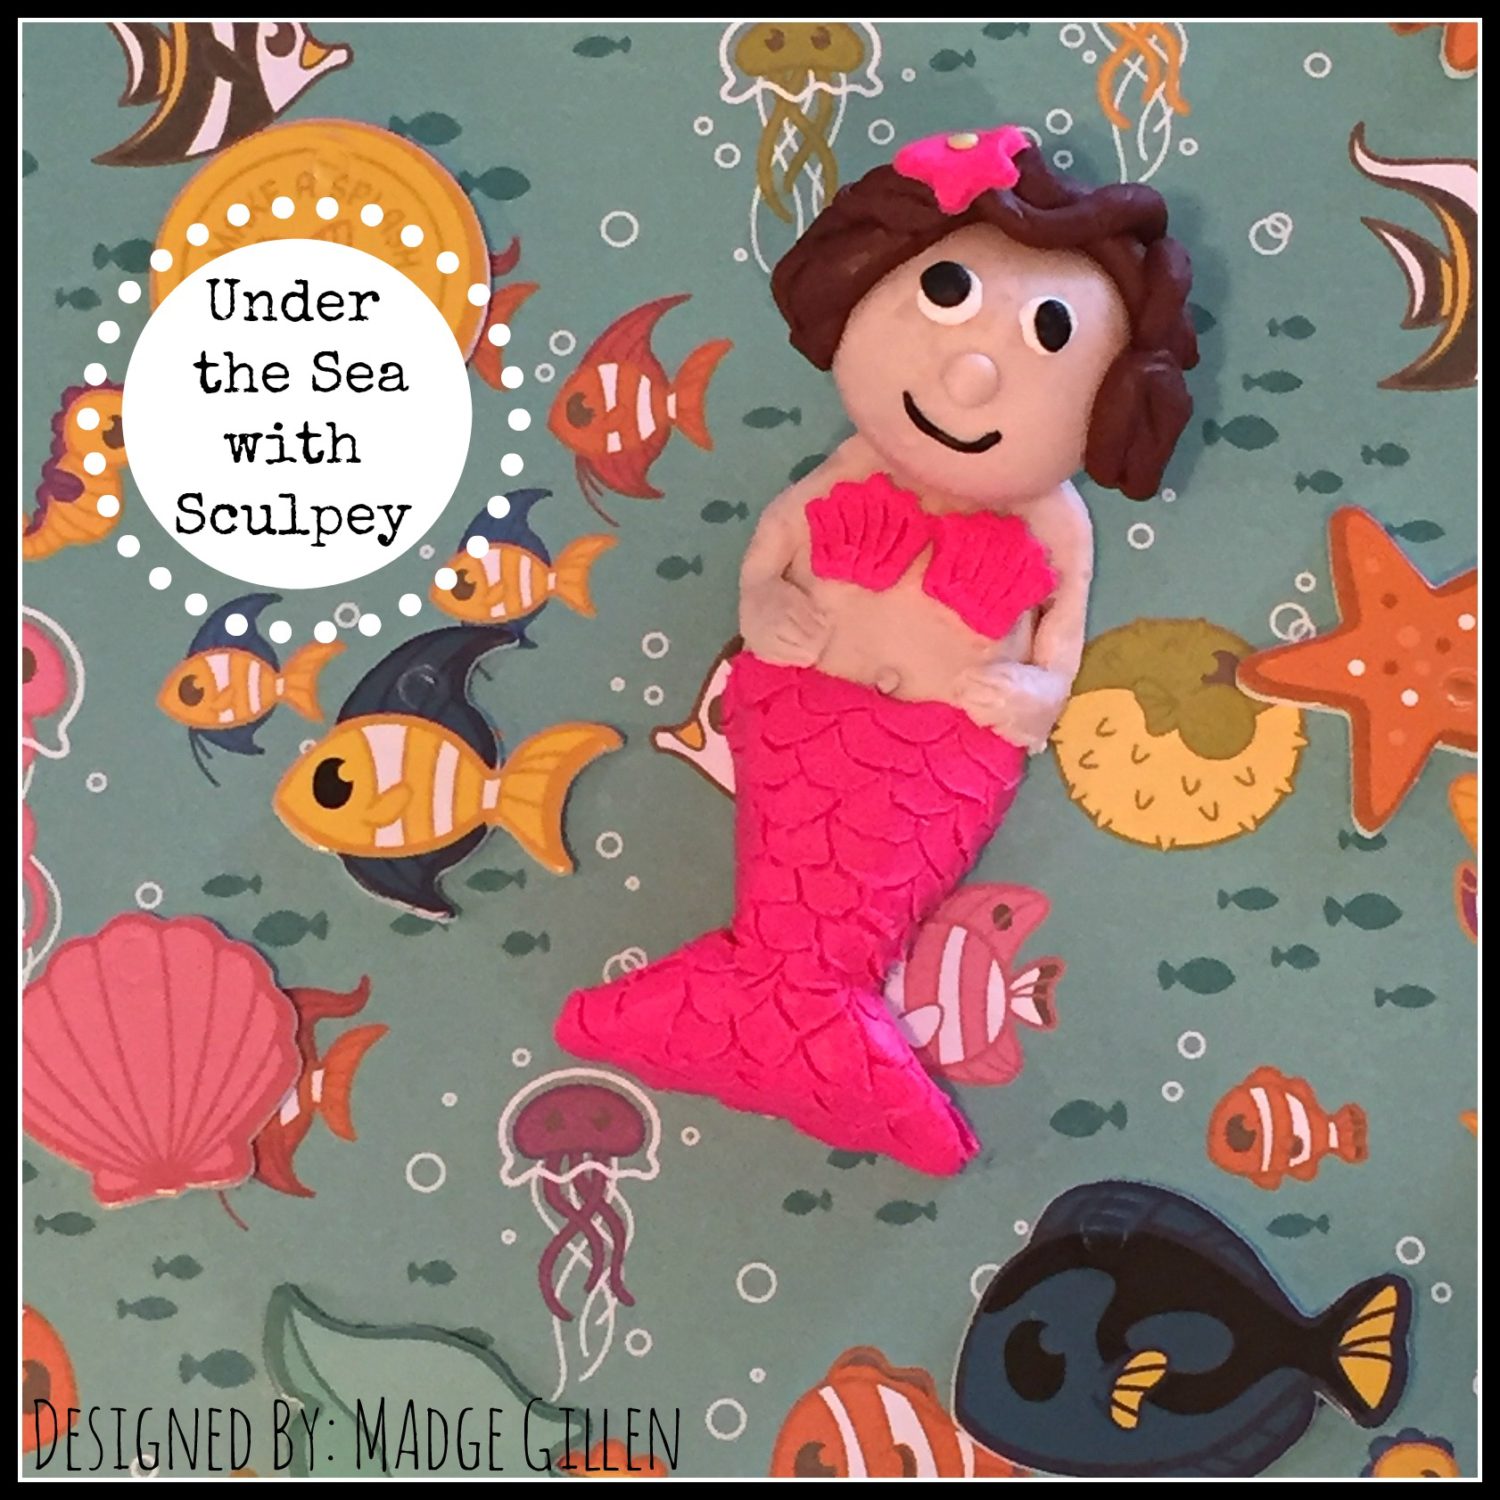 Under the Sea with Sculpey